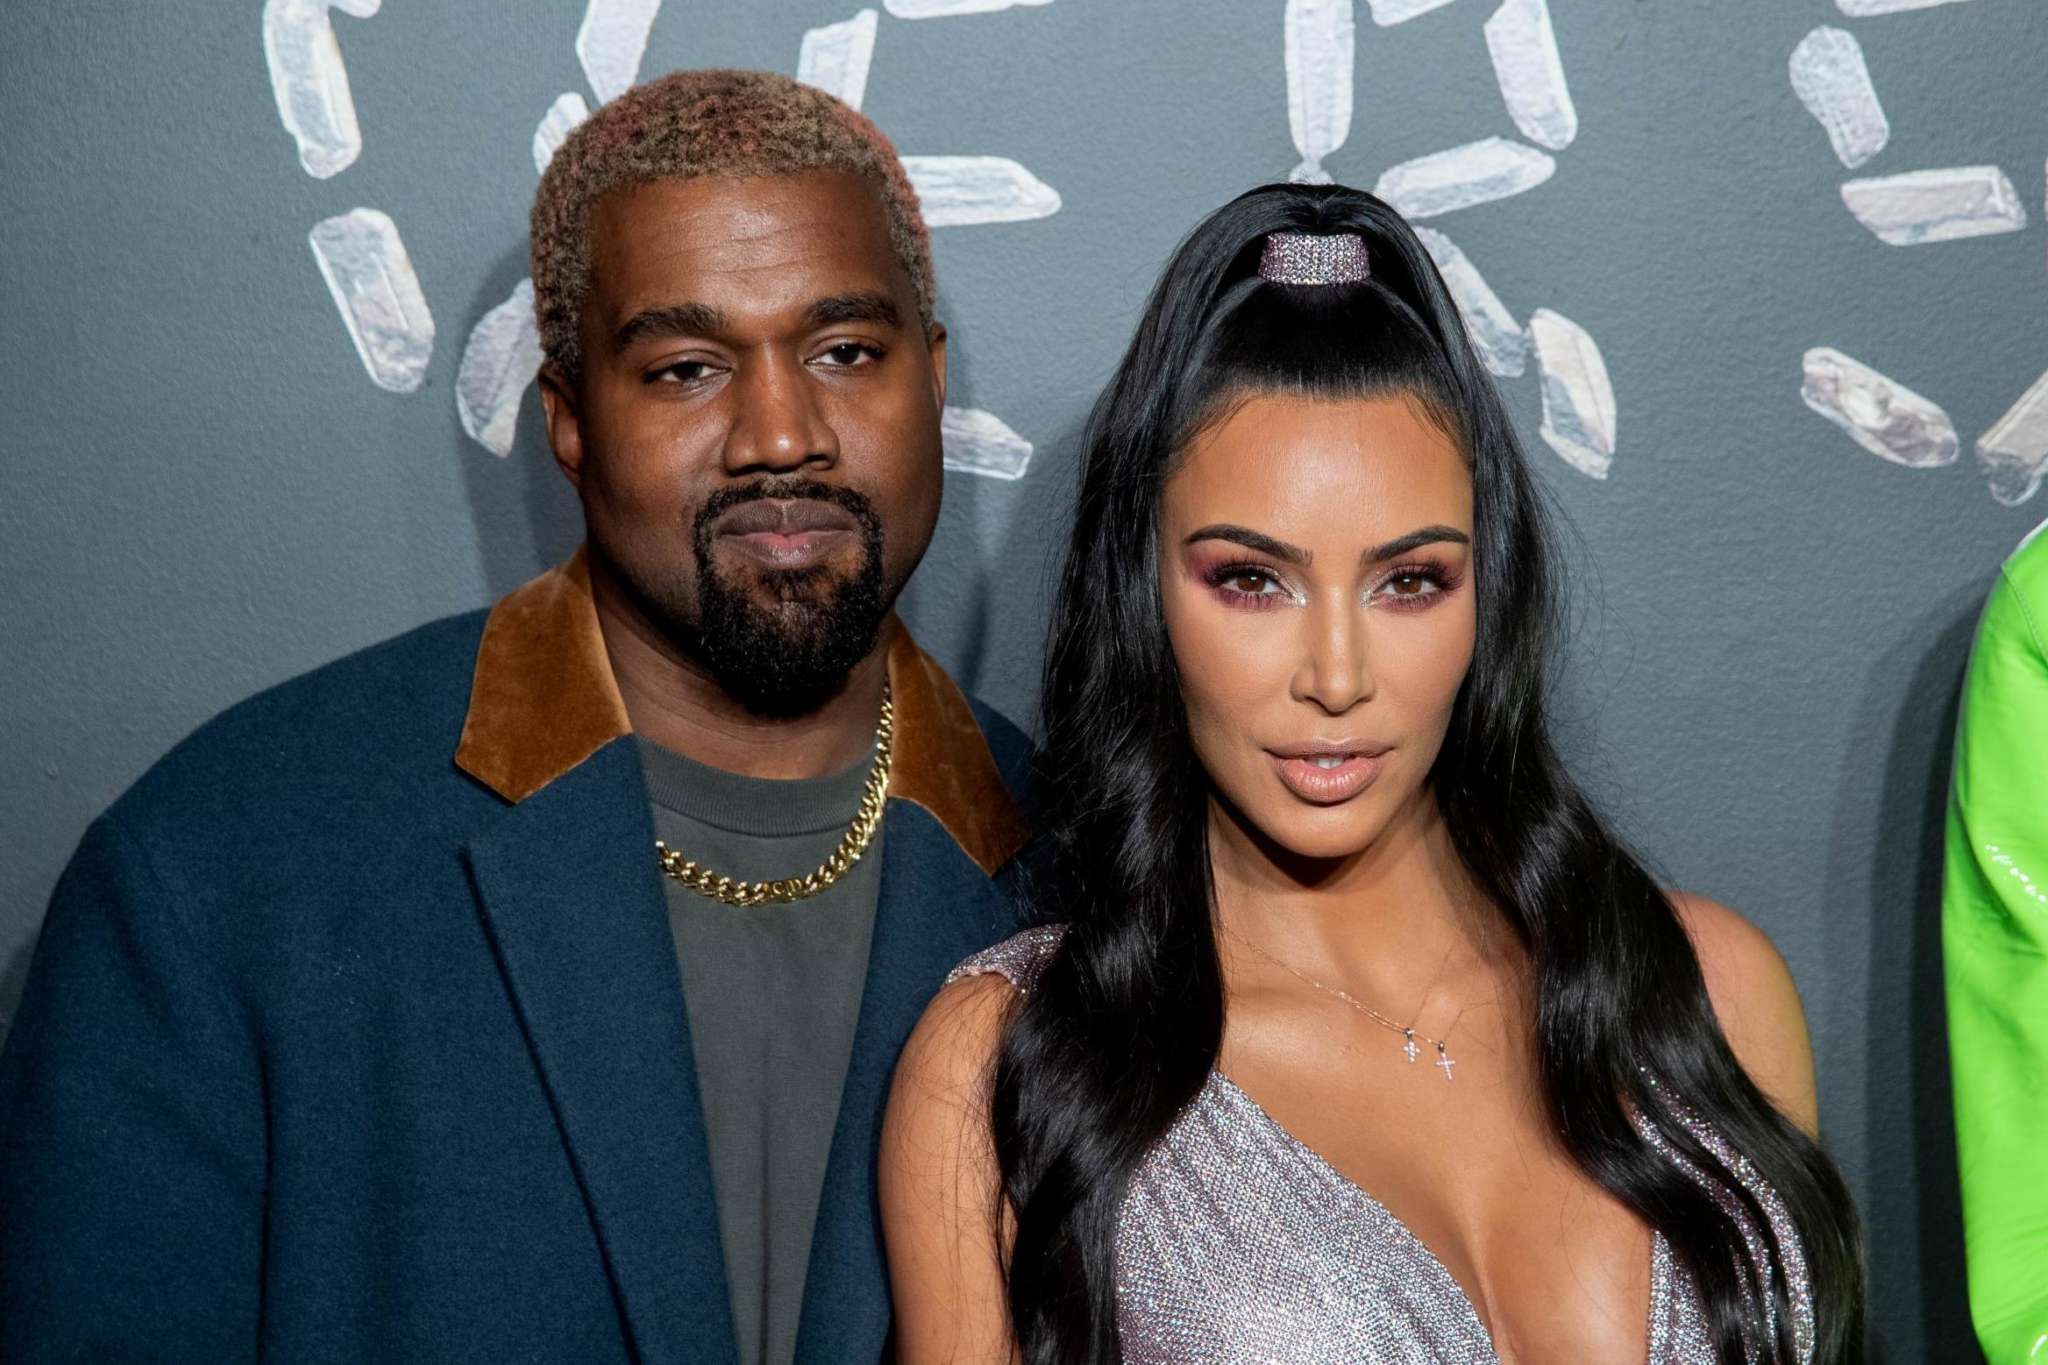 Kanye West Apologizes To Kim Kardashian For Publicly Humiliating Her And Gets Support From Fans